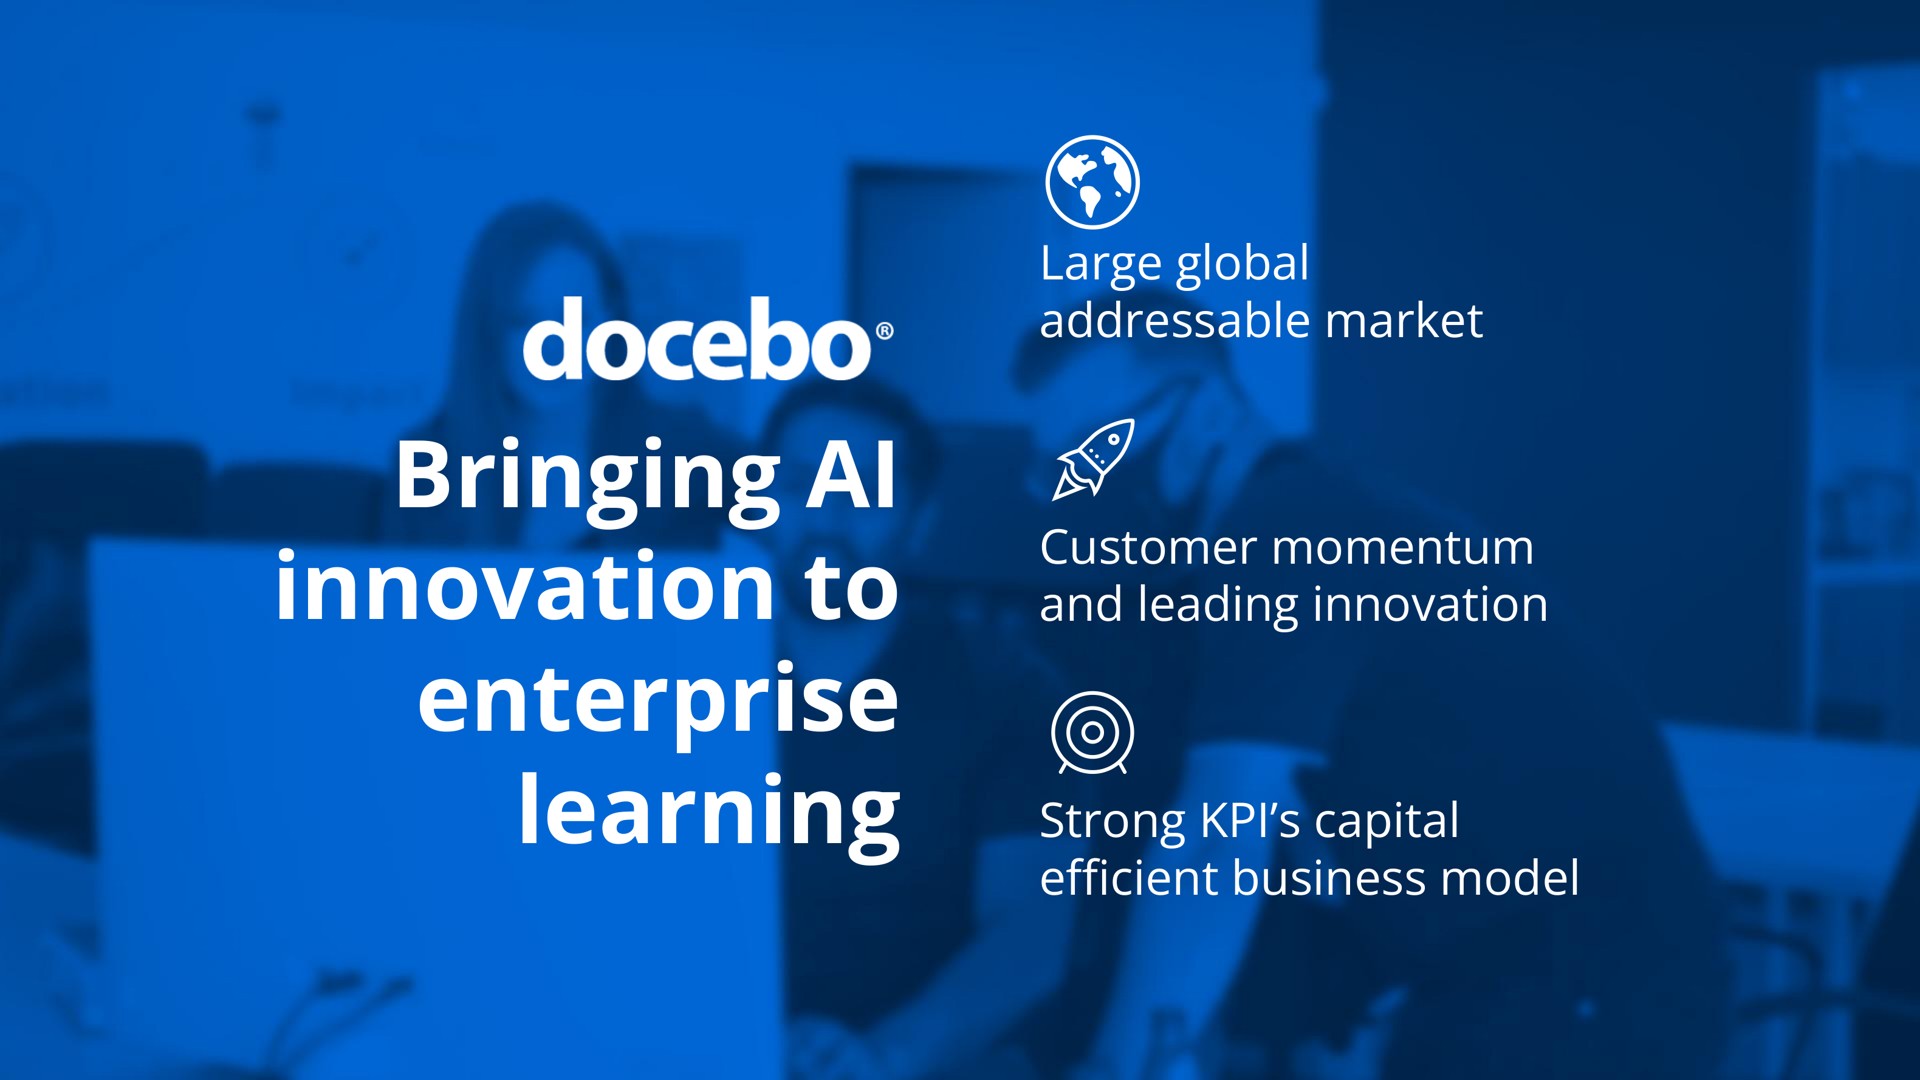 bringing innovation to enterprise learning large global market customer momentum and leading innovation strong capital business model me | Docebo